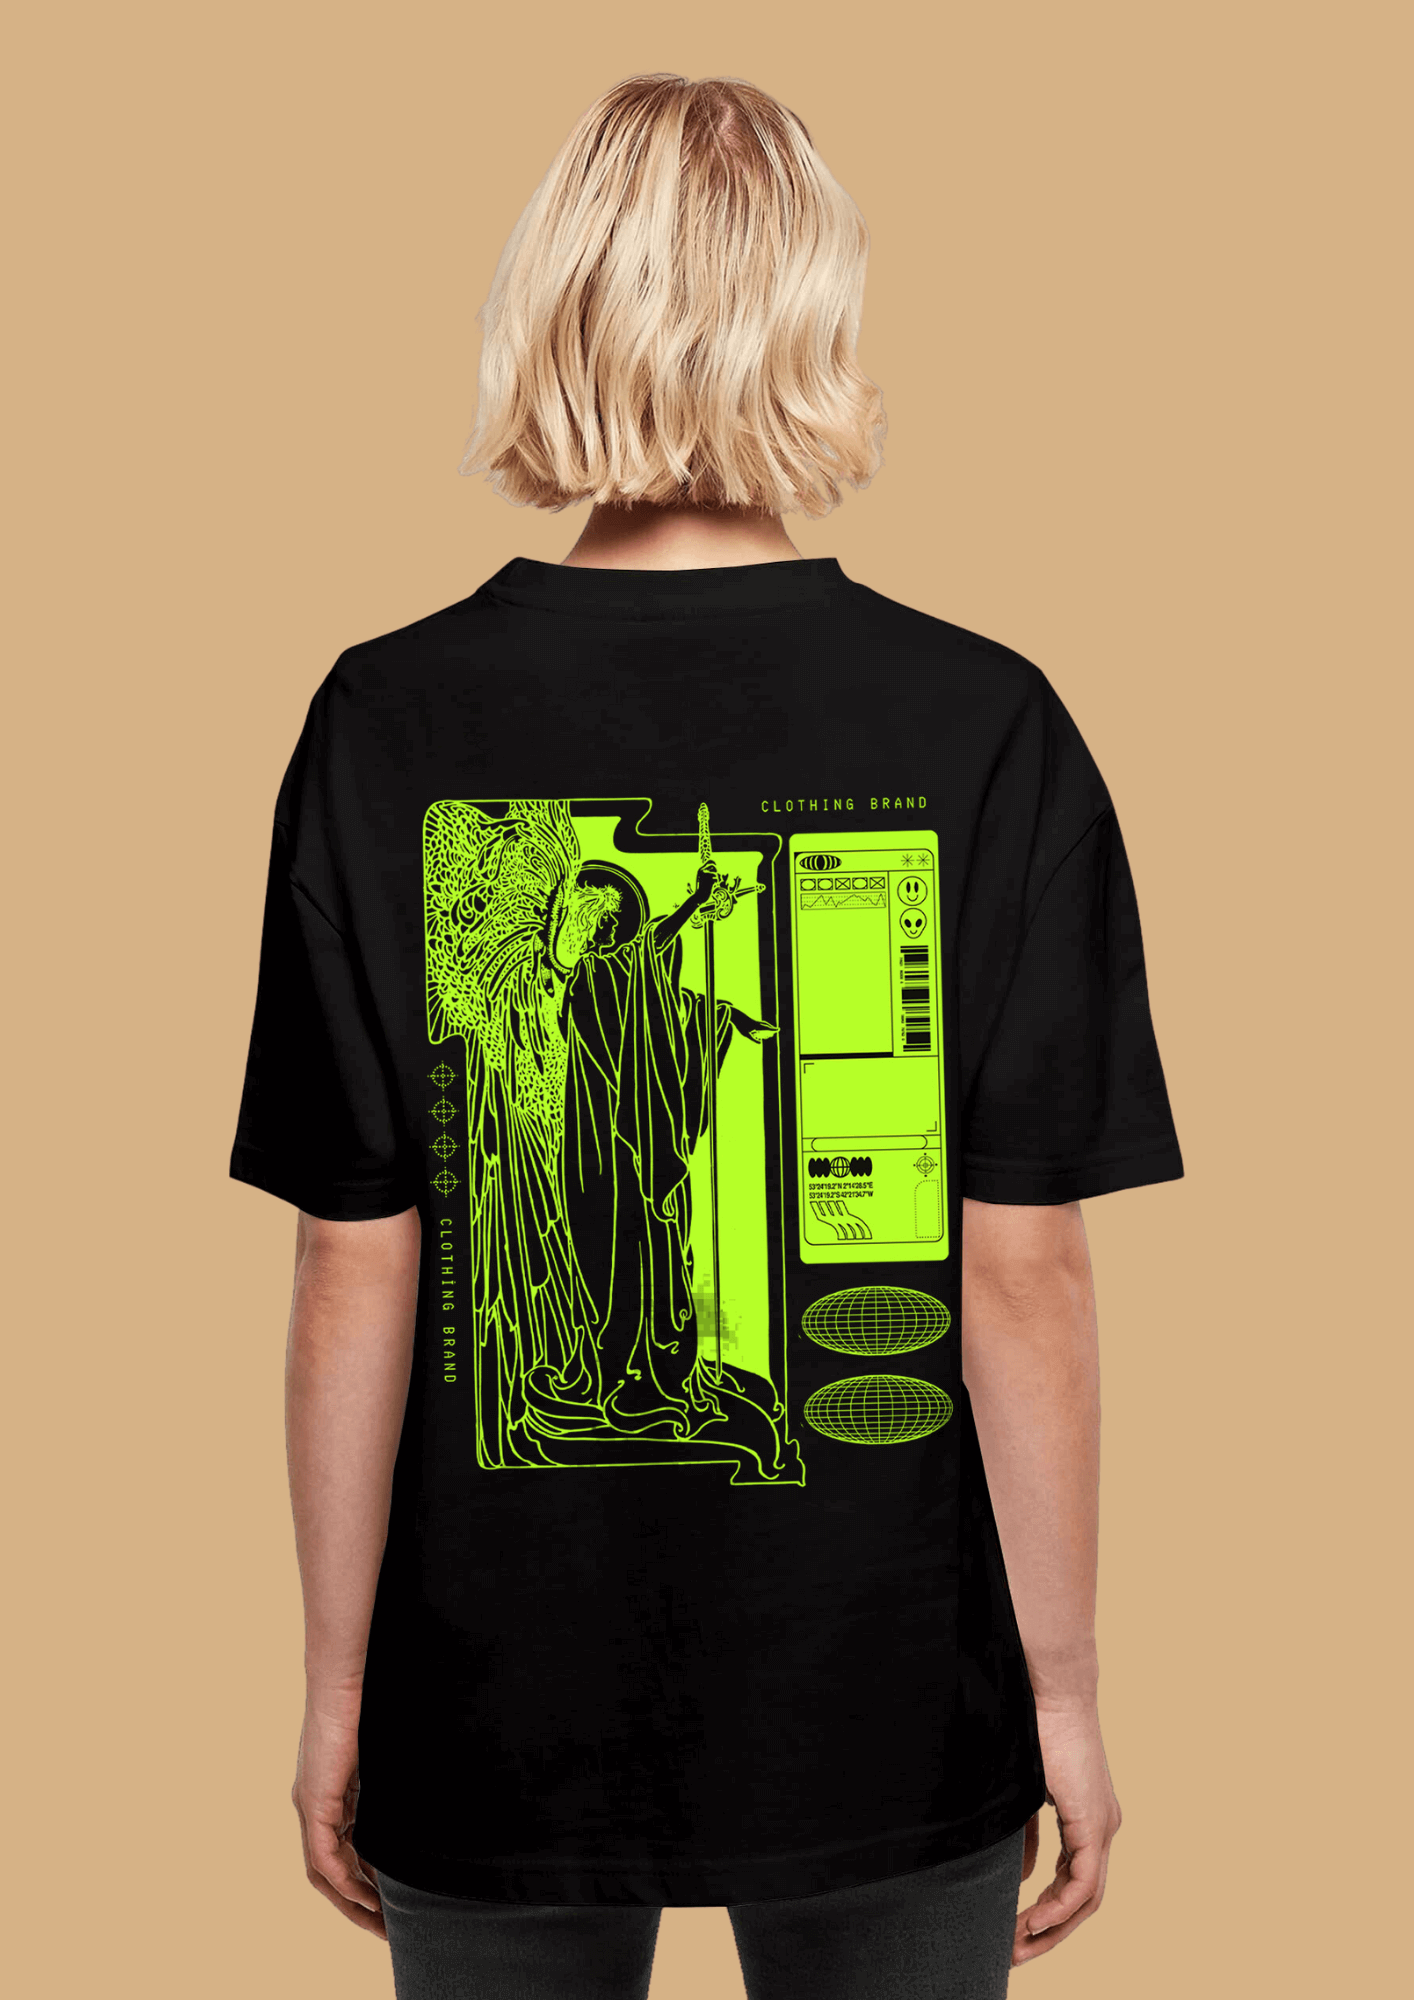 Lady justice printed black color oversized t-shirt by offmint